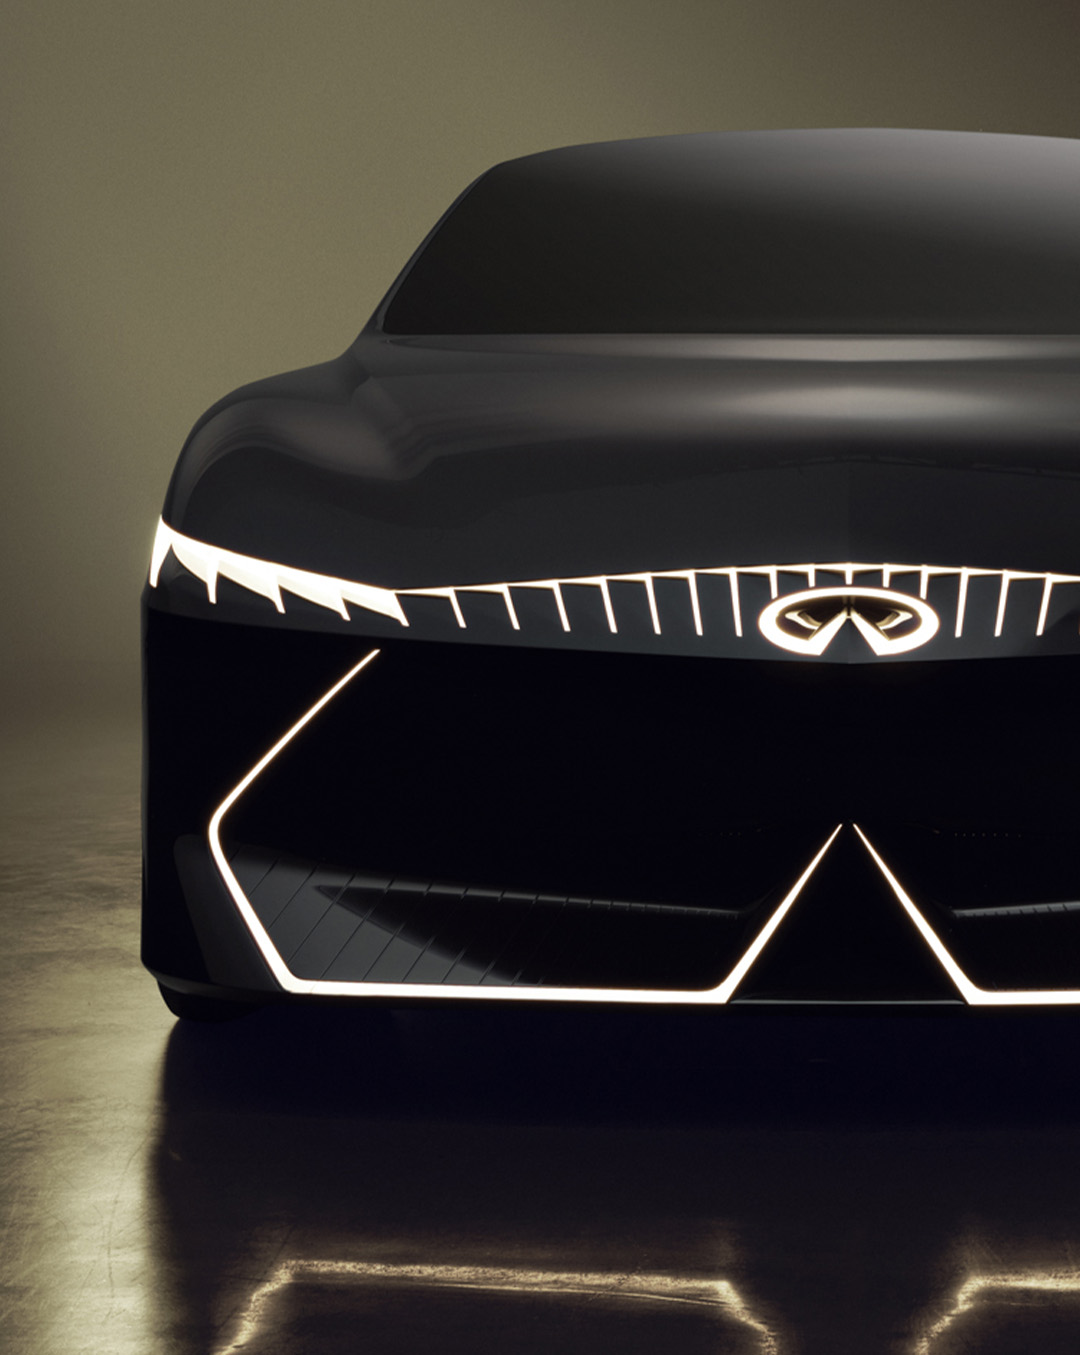 Front view of the INFINITI Vision Qe electric car